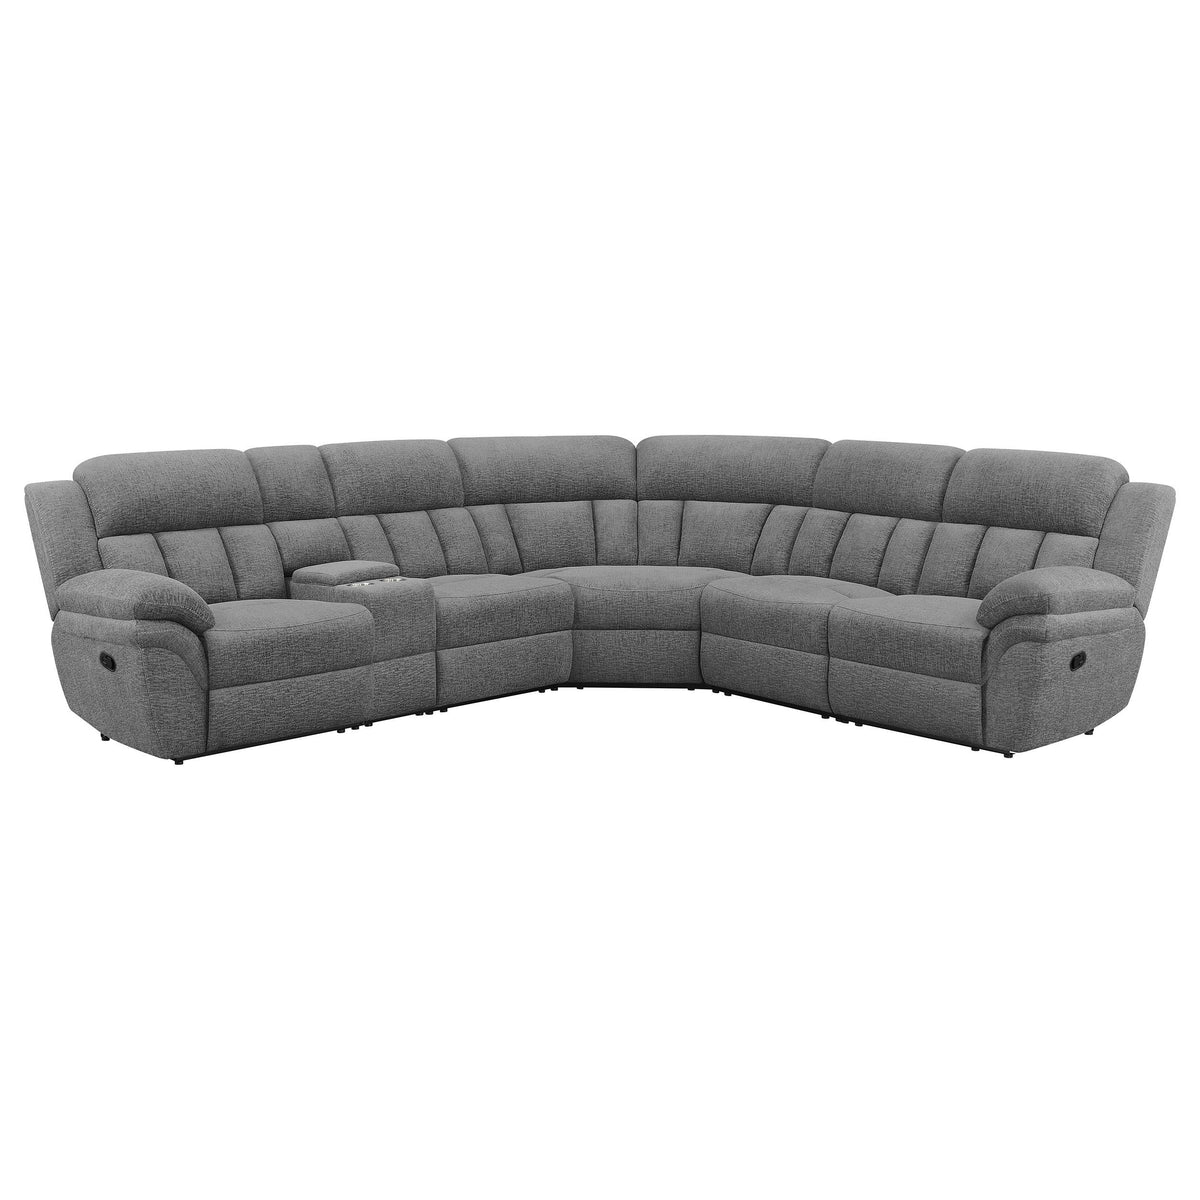 Bahrain 6-piece Upholstered Motion Sectional Charcoal Bahrain 6-piece Upholstered Motion Sectional Charcoal Half Price Furniture